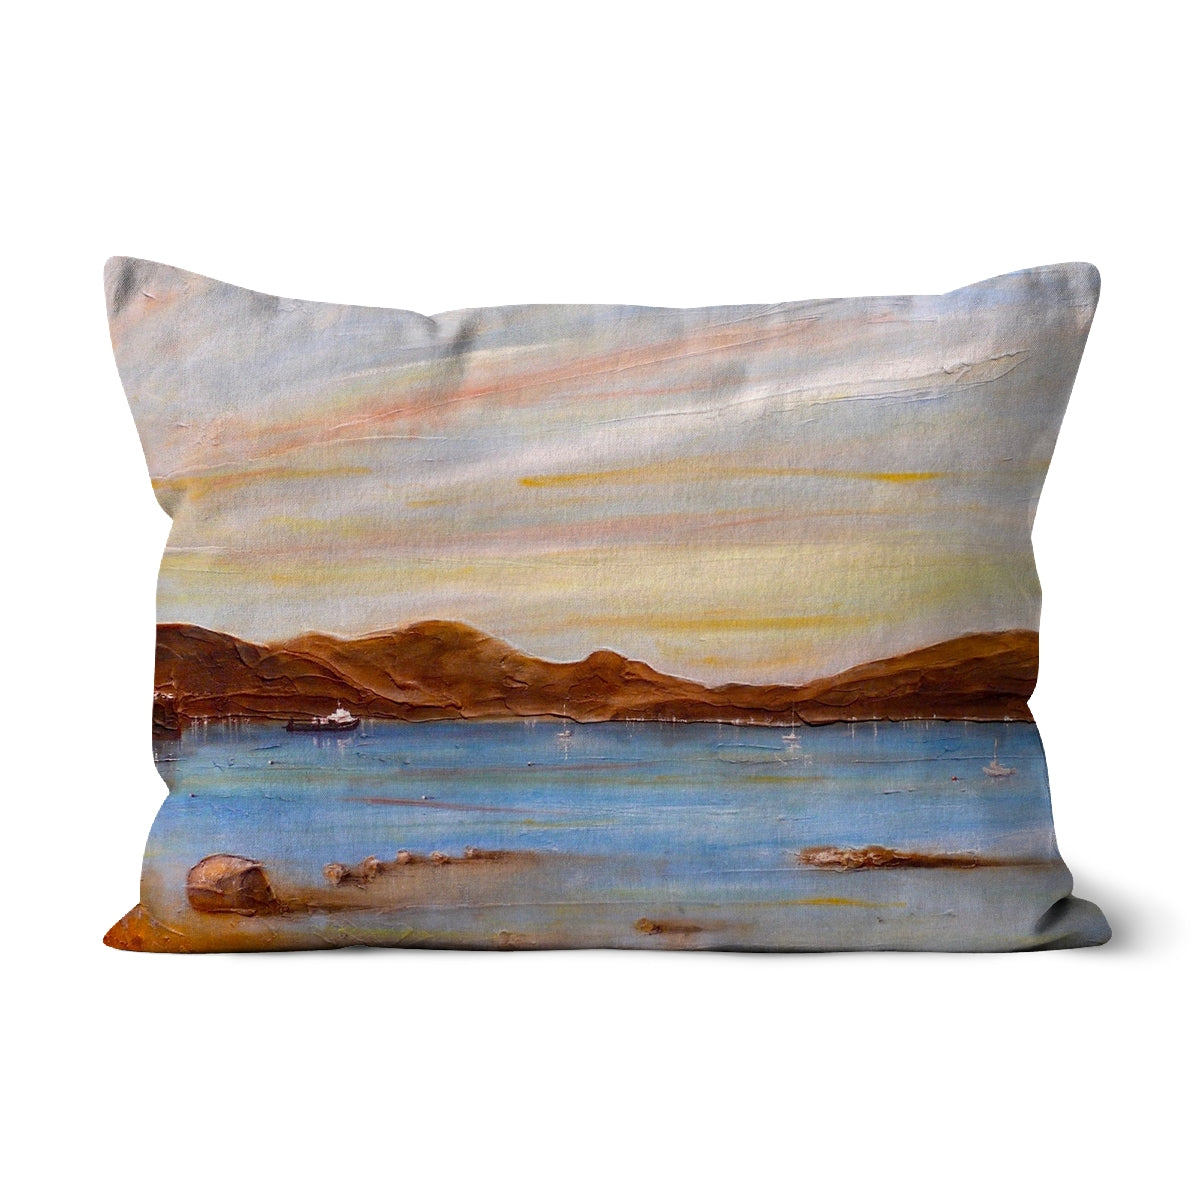 The Last Ferry To Dunoon Art Gifts Cushion-Cushions-River Clyde Art Gallery-Canvas-19"x13"-Paintings, Prints, Homeware, Art Gifts From Scotland By Scottish Artist Kevin Hunter